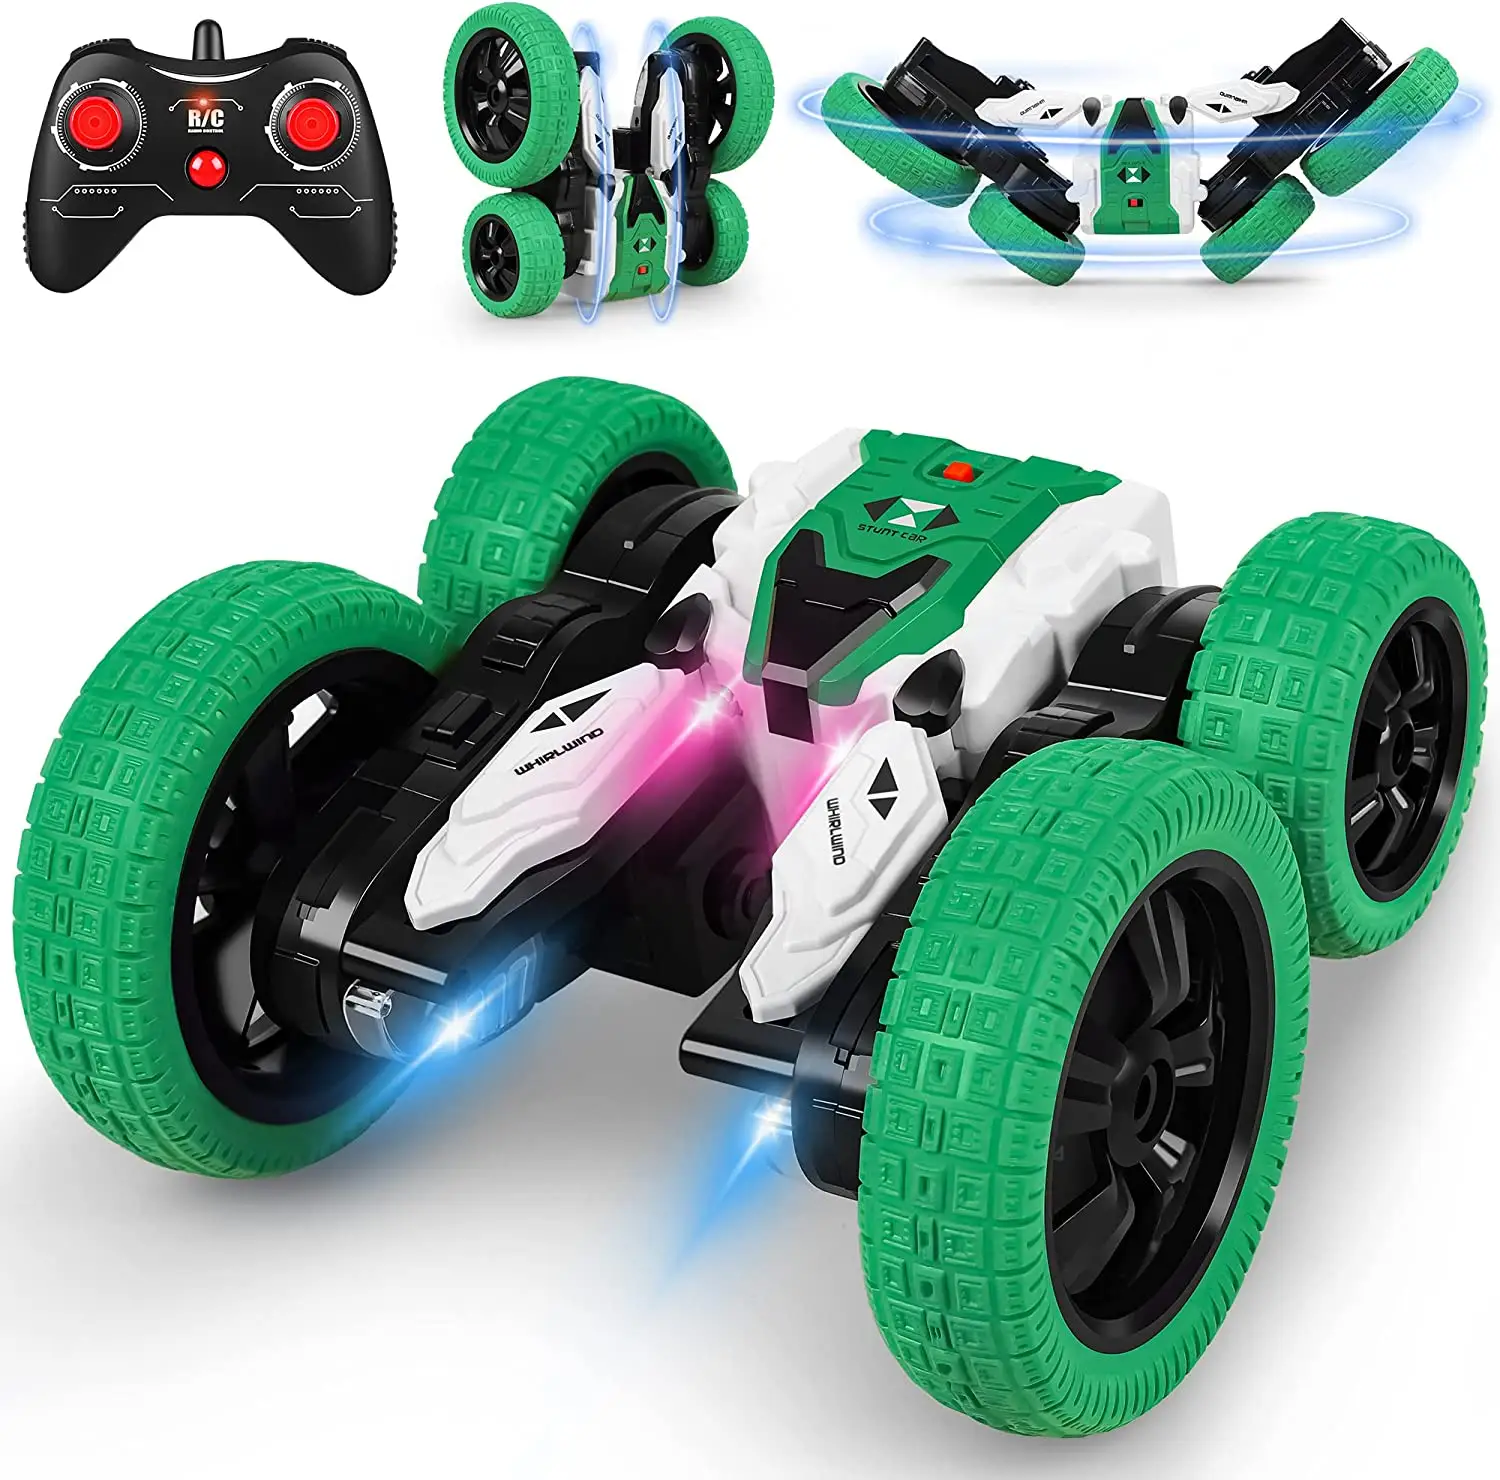 DWI Dowellin rc stunt car electrical toy car drift car rc with 360 Flips Double Side remote control toy vehicles for kid